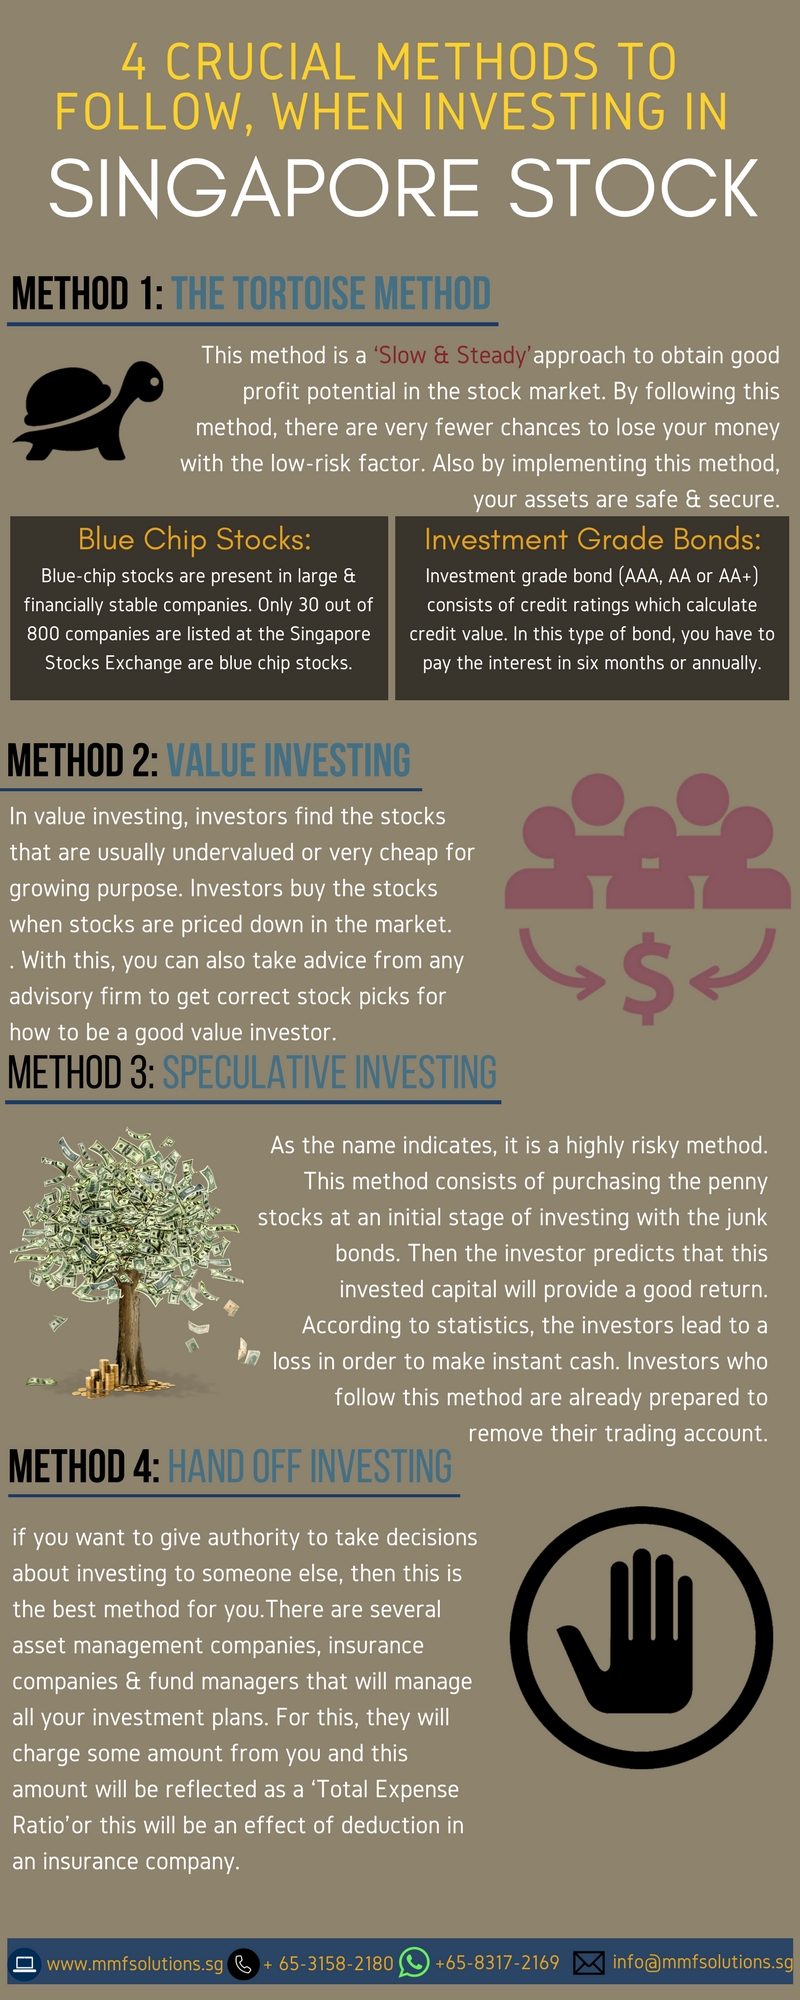 4-Crucial-Methods-to-follow-When-Investing-In-Singapore-Stocks-infographic-plaza